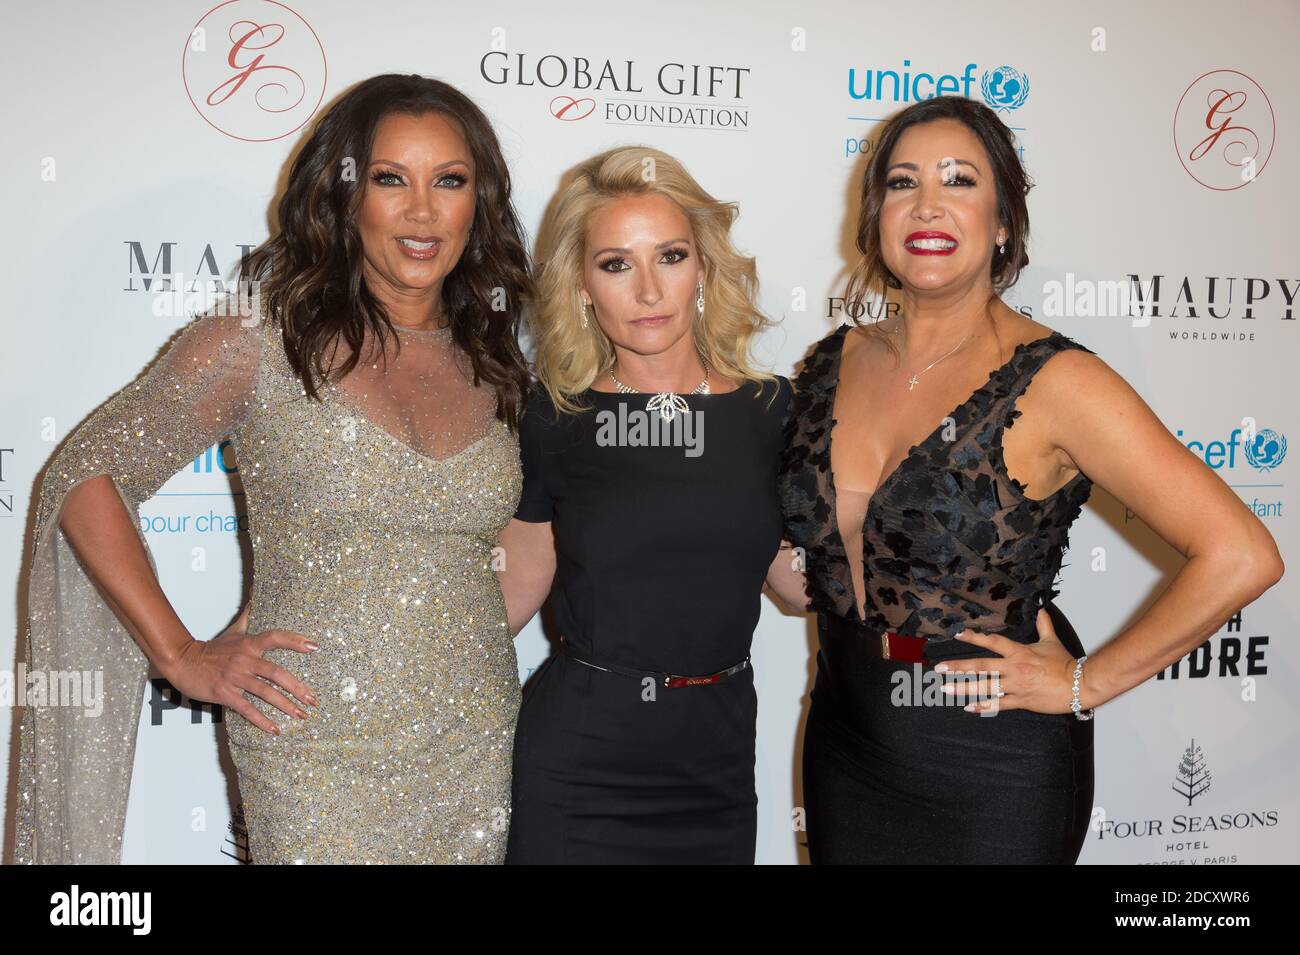 Vanessa Lynn Williams, Maria Bravo and Guest attending the Global Gift Gala in aid of Unicef France and Global Gift Foundation at Seasons Hotel George V in Paris, France on april 25, 2018 . Photo by Nicolas Genin/ABACAPRESS.COM Stock Photo